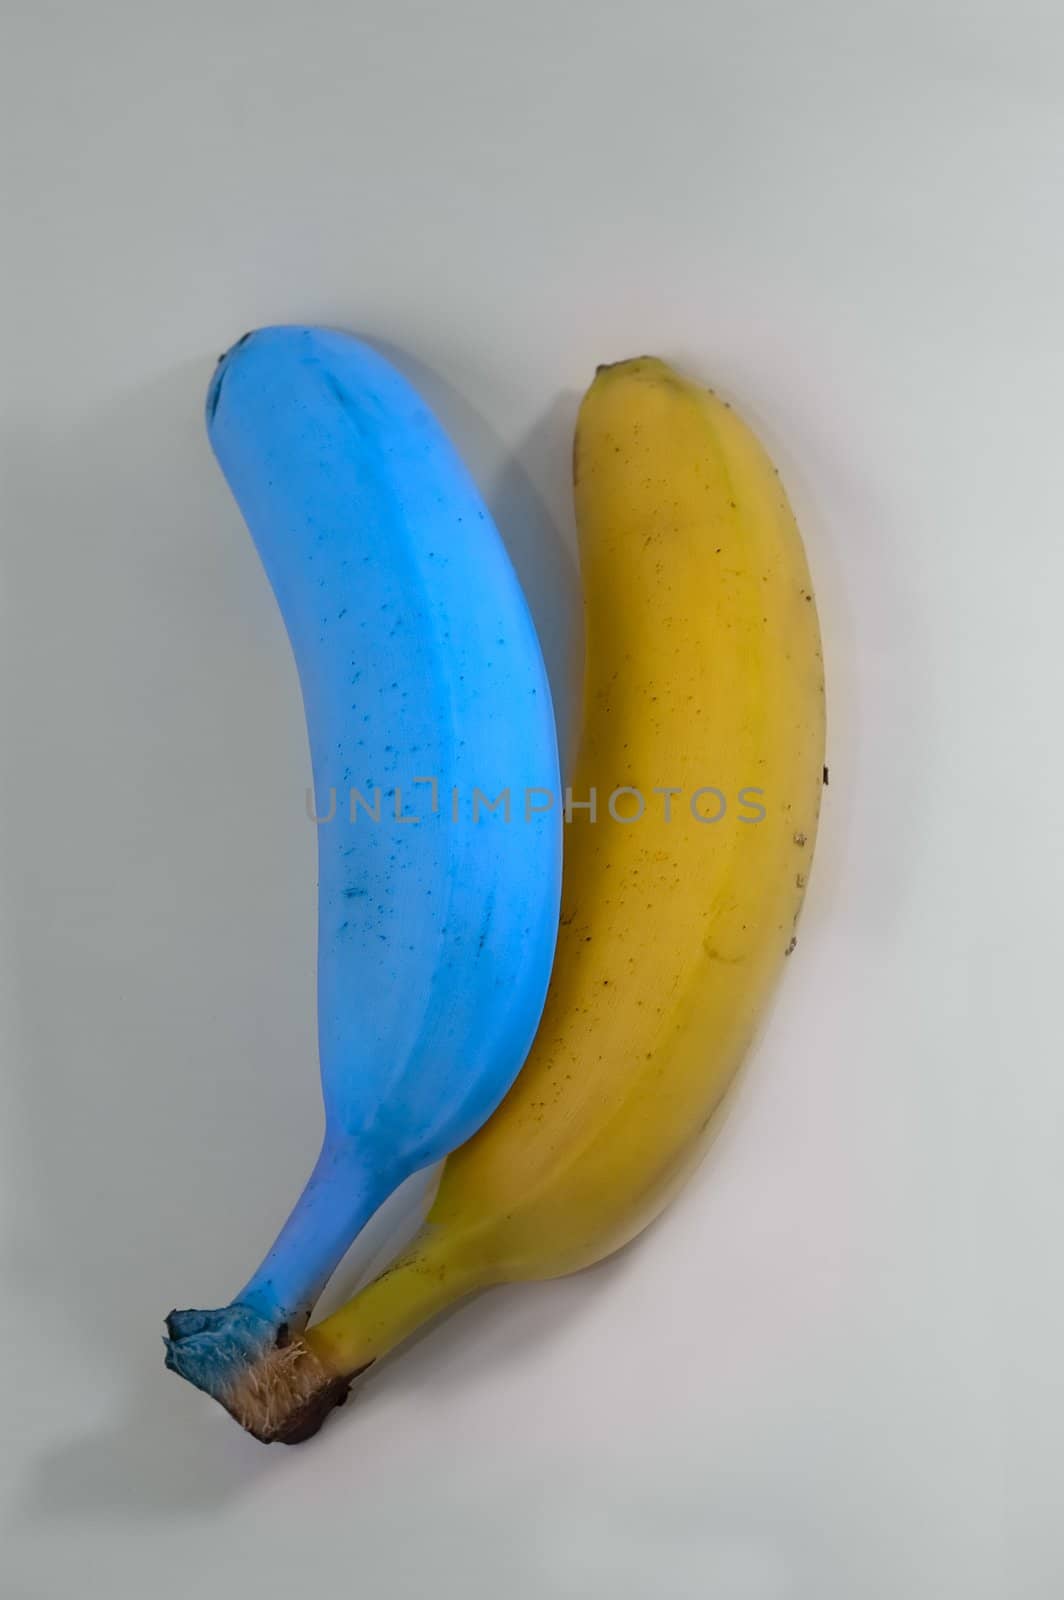 Yellow and blue bananas  on grey background
